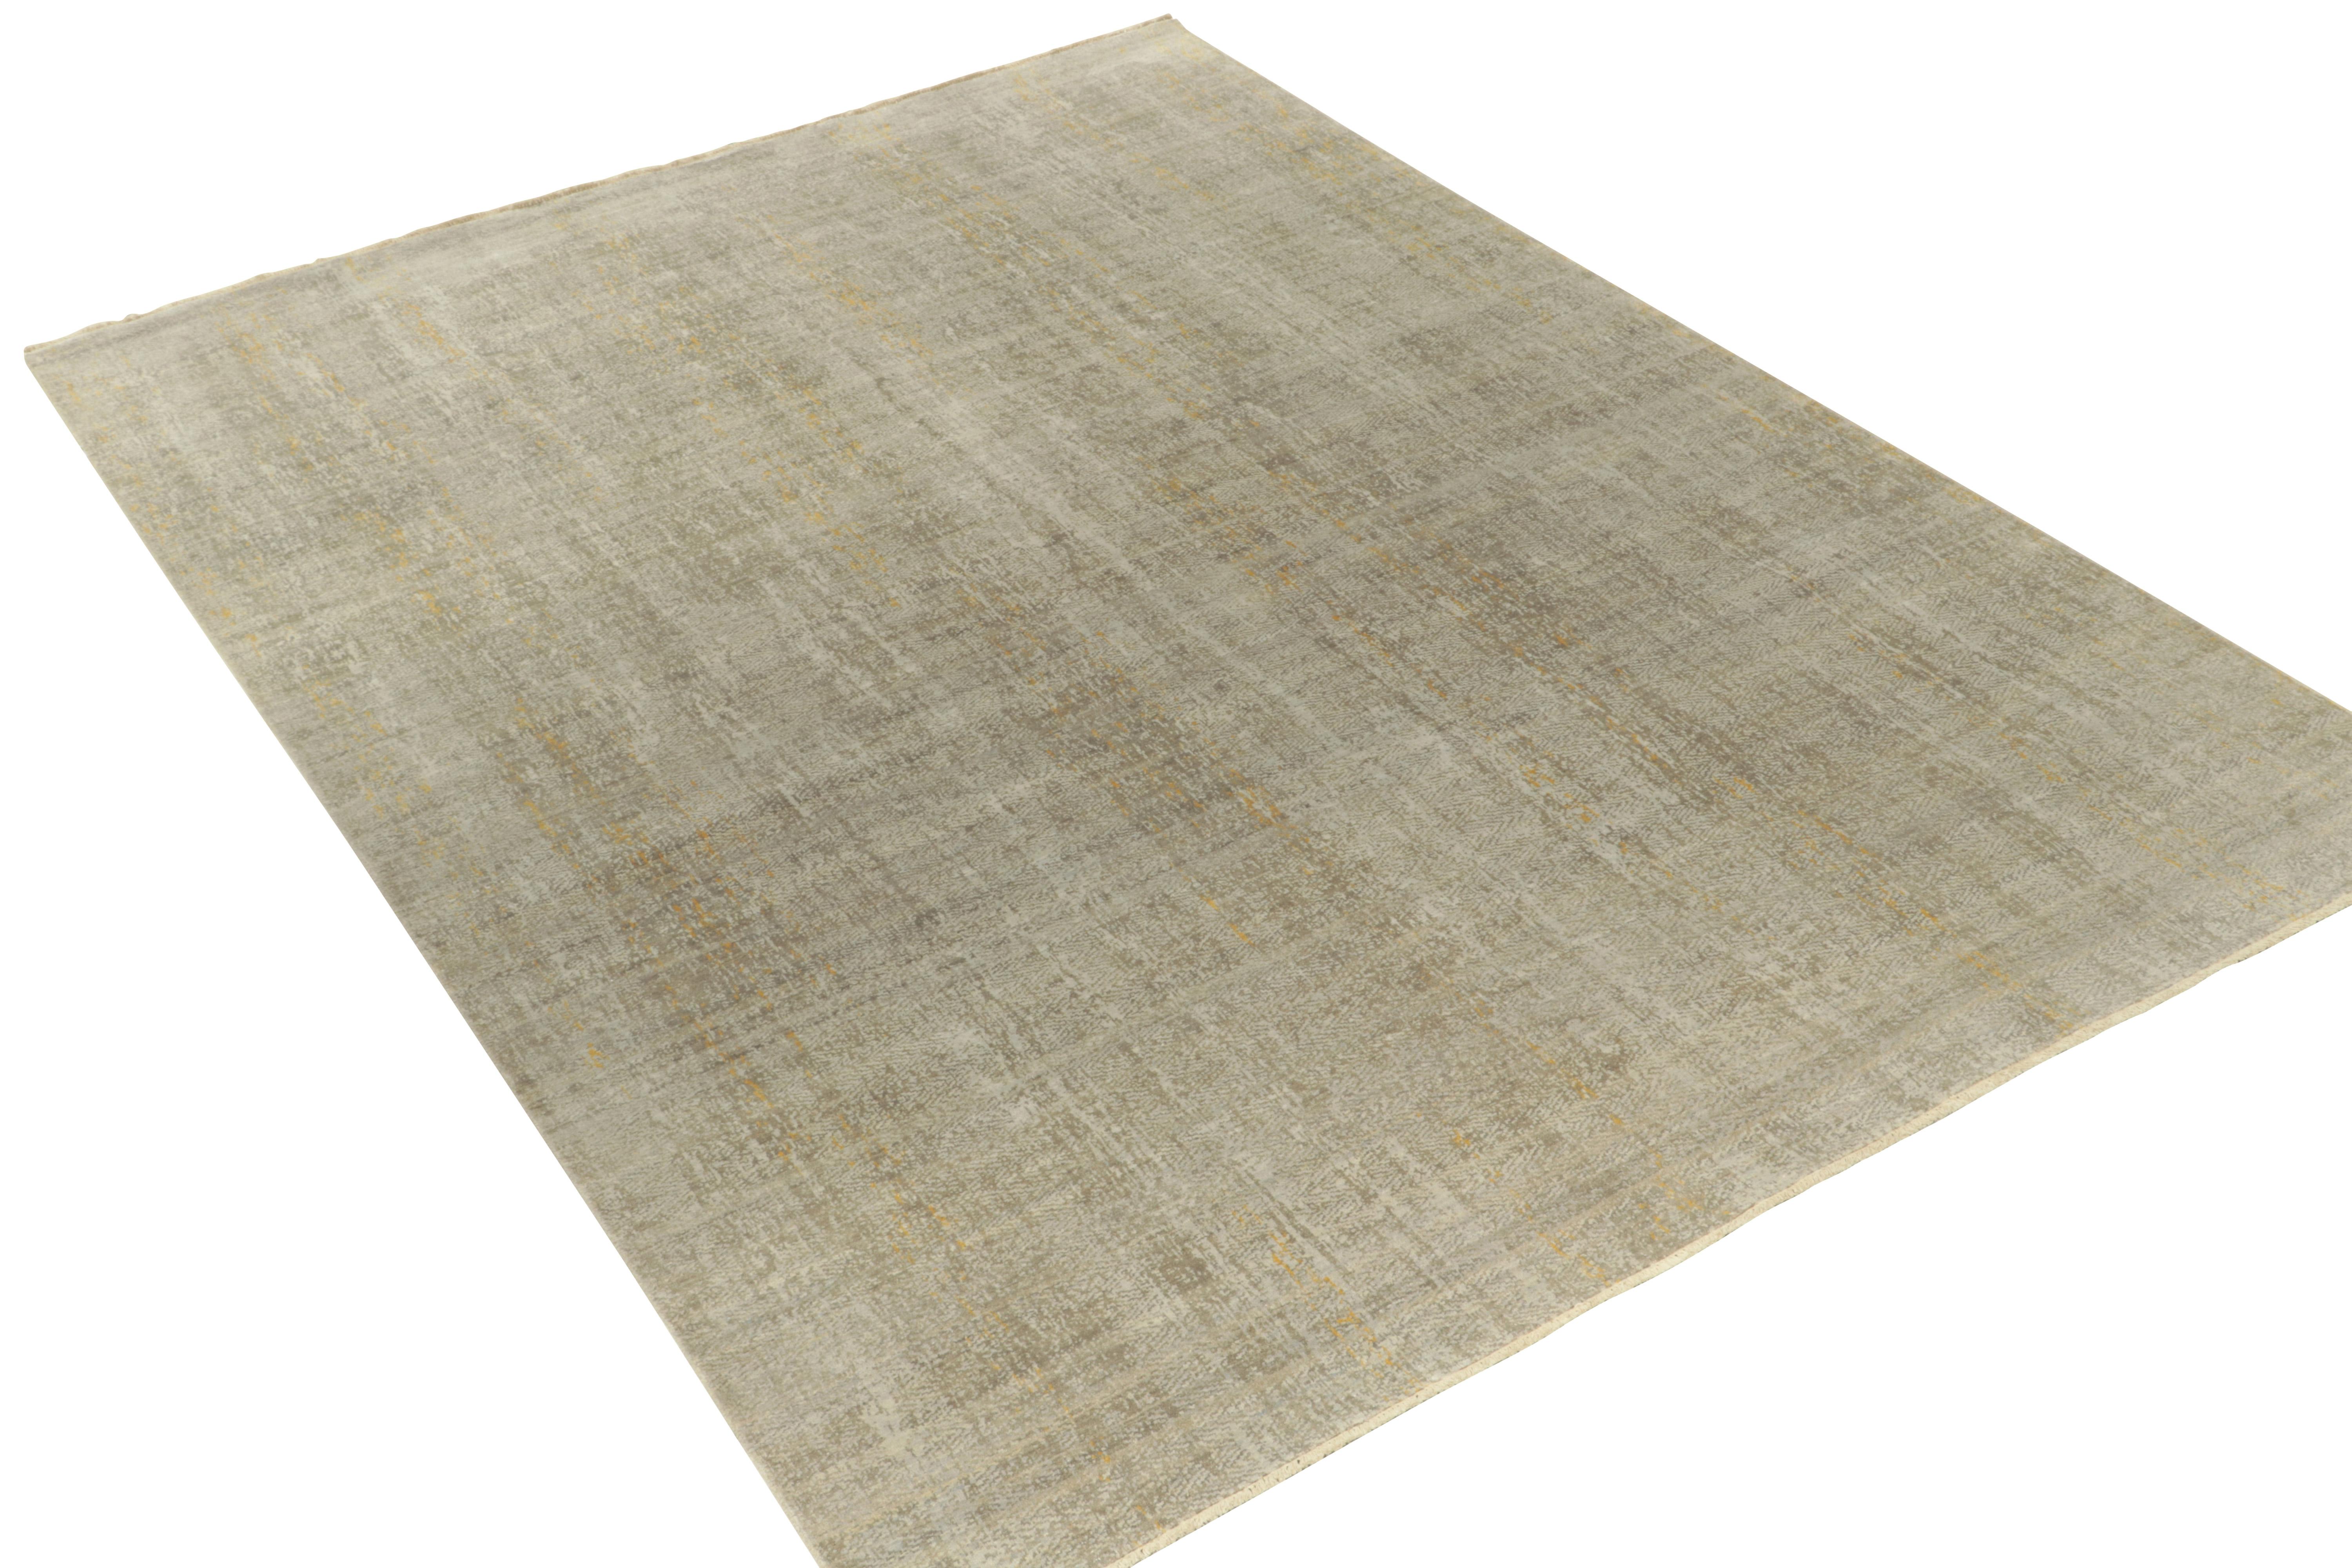 Hand-knotted in fine silk, a 9x12 abstract piece from Rug & Kilim’s contemporary designs. The bold modern vision enjoys silver gray & blue with subdued gold accents lending a fabulous dimensionality in the marriage of texture and overlapping